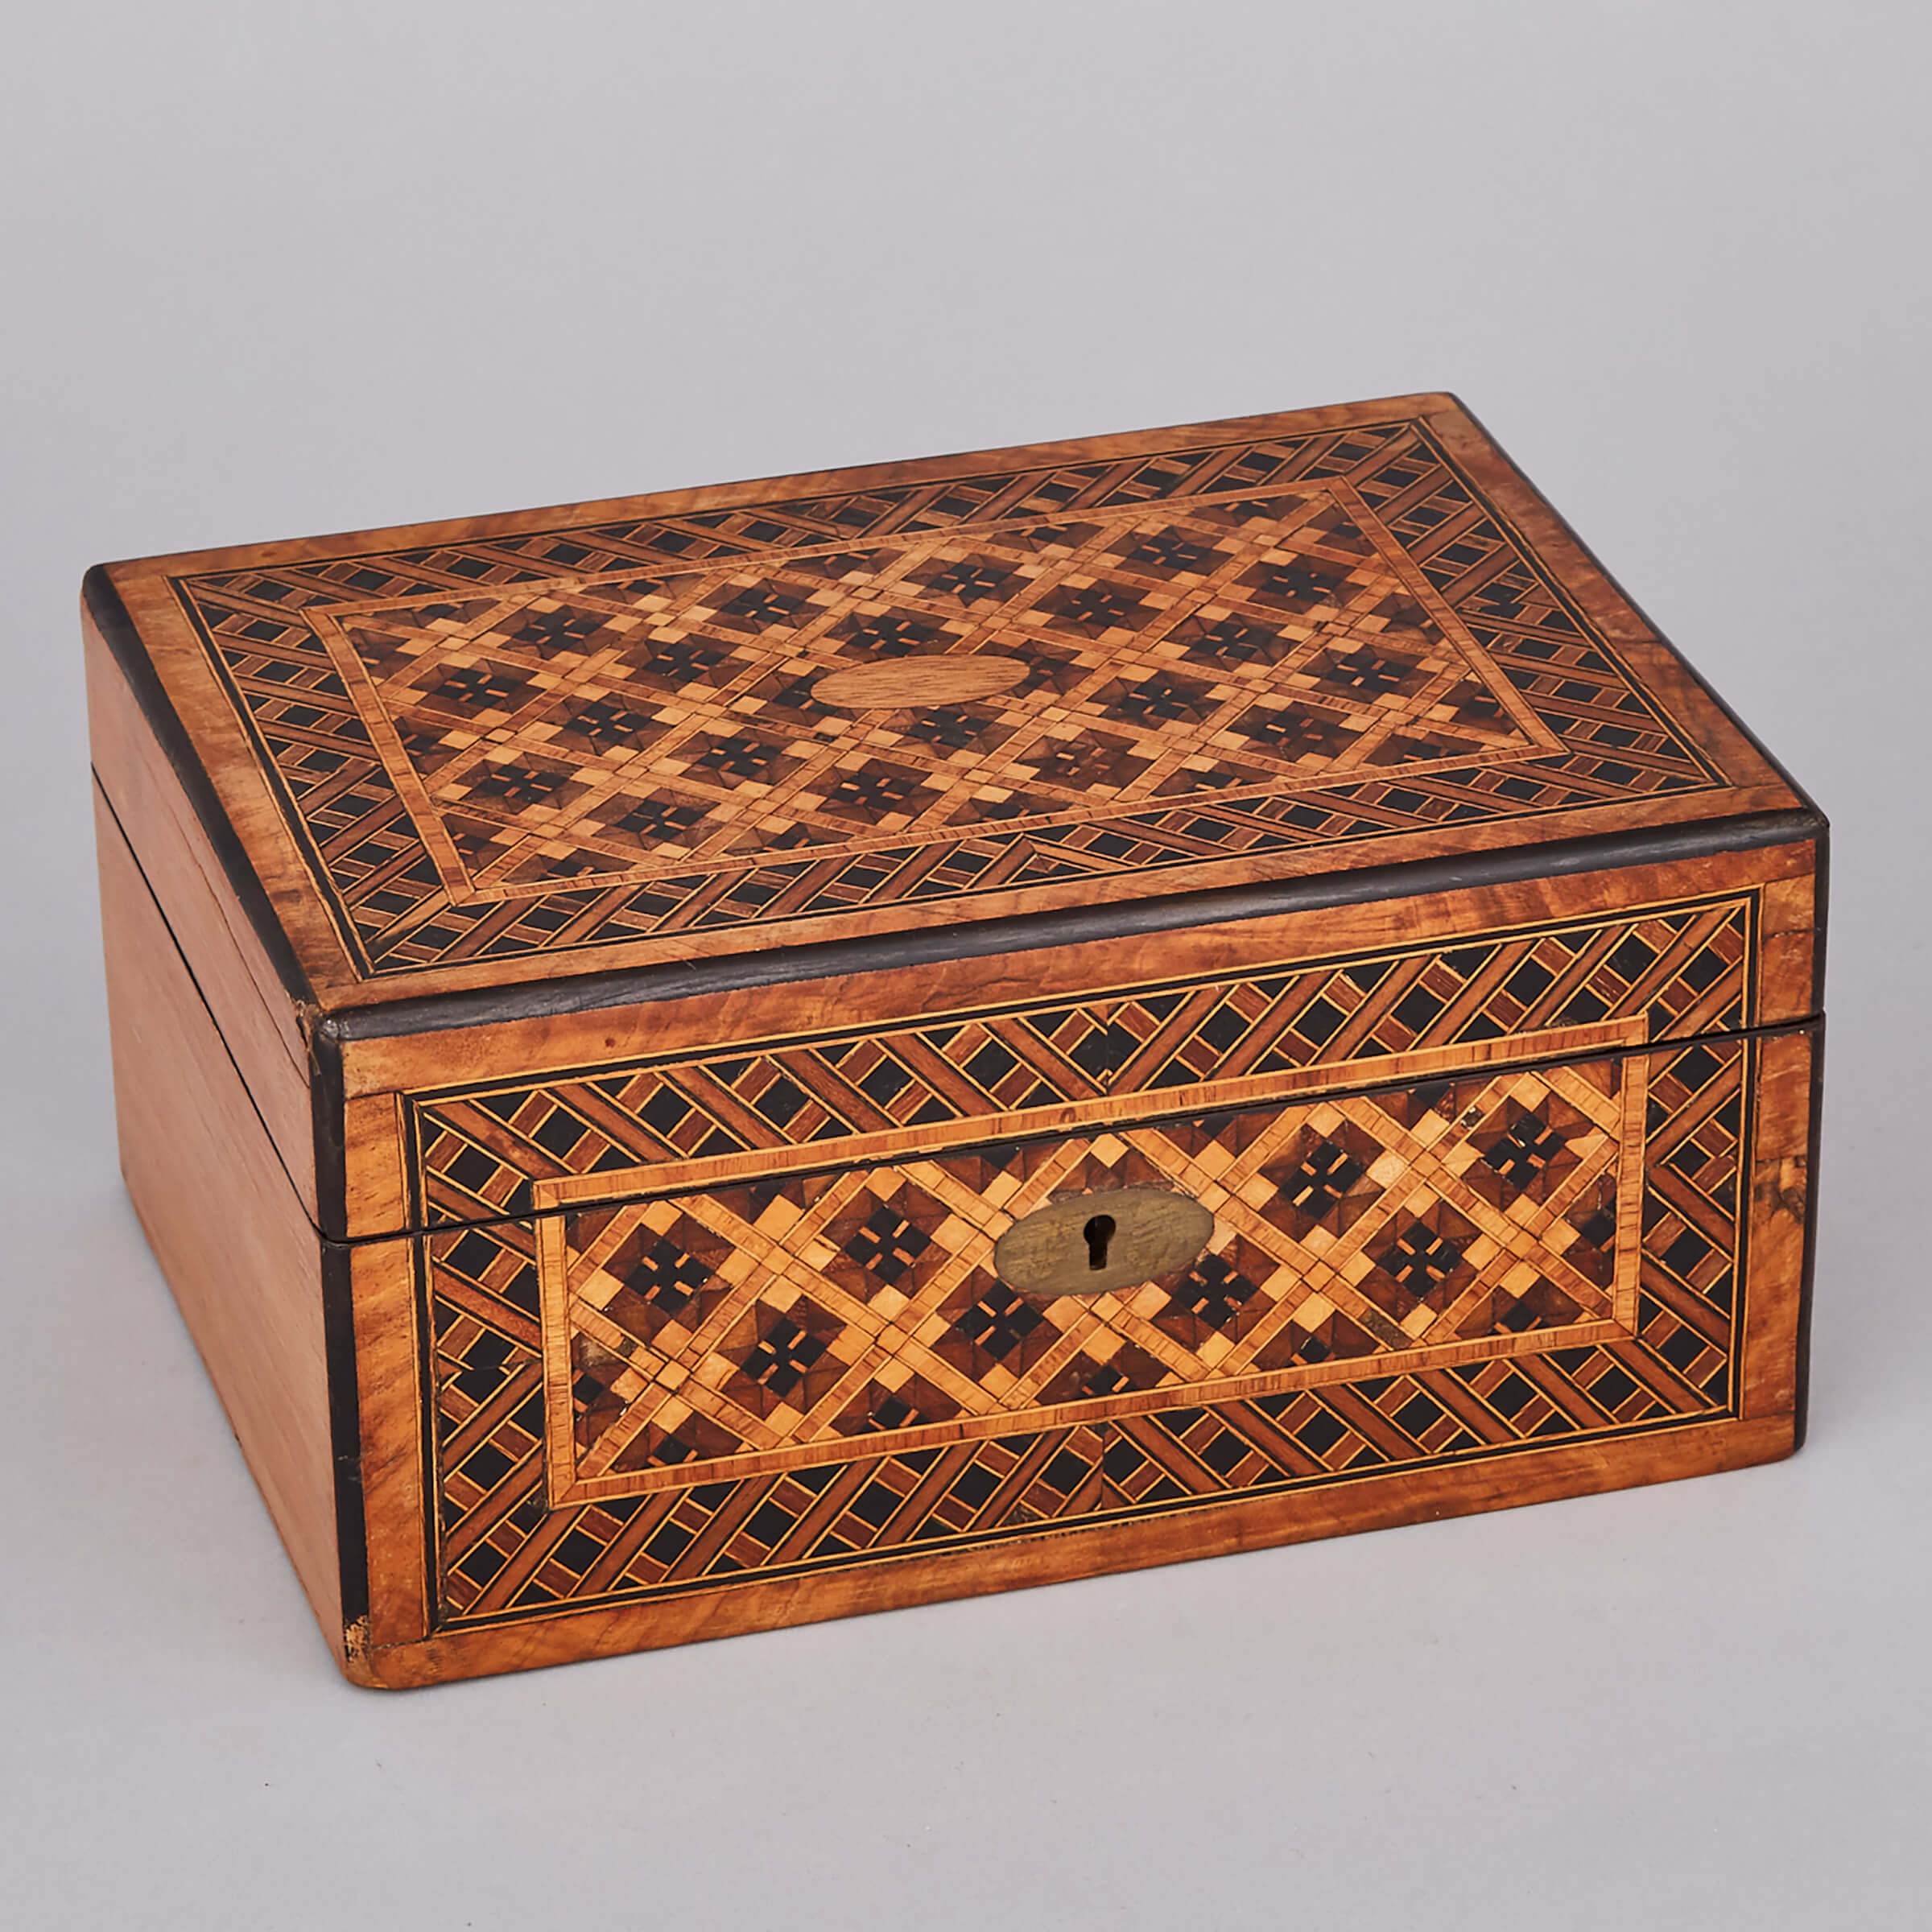 Tunbridge Ware Box and a Small Inlaid Mahogany Drawer on Stand, early 20th century